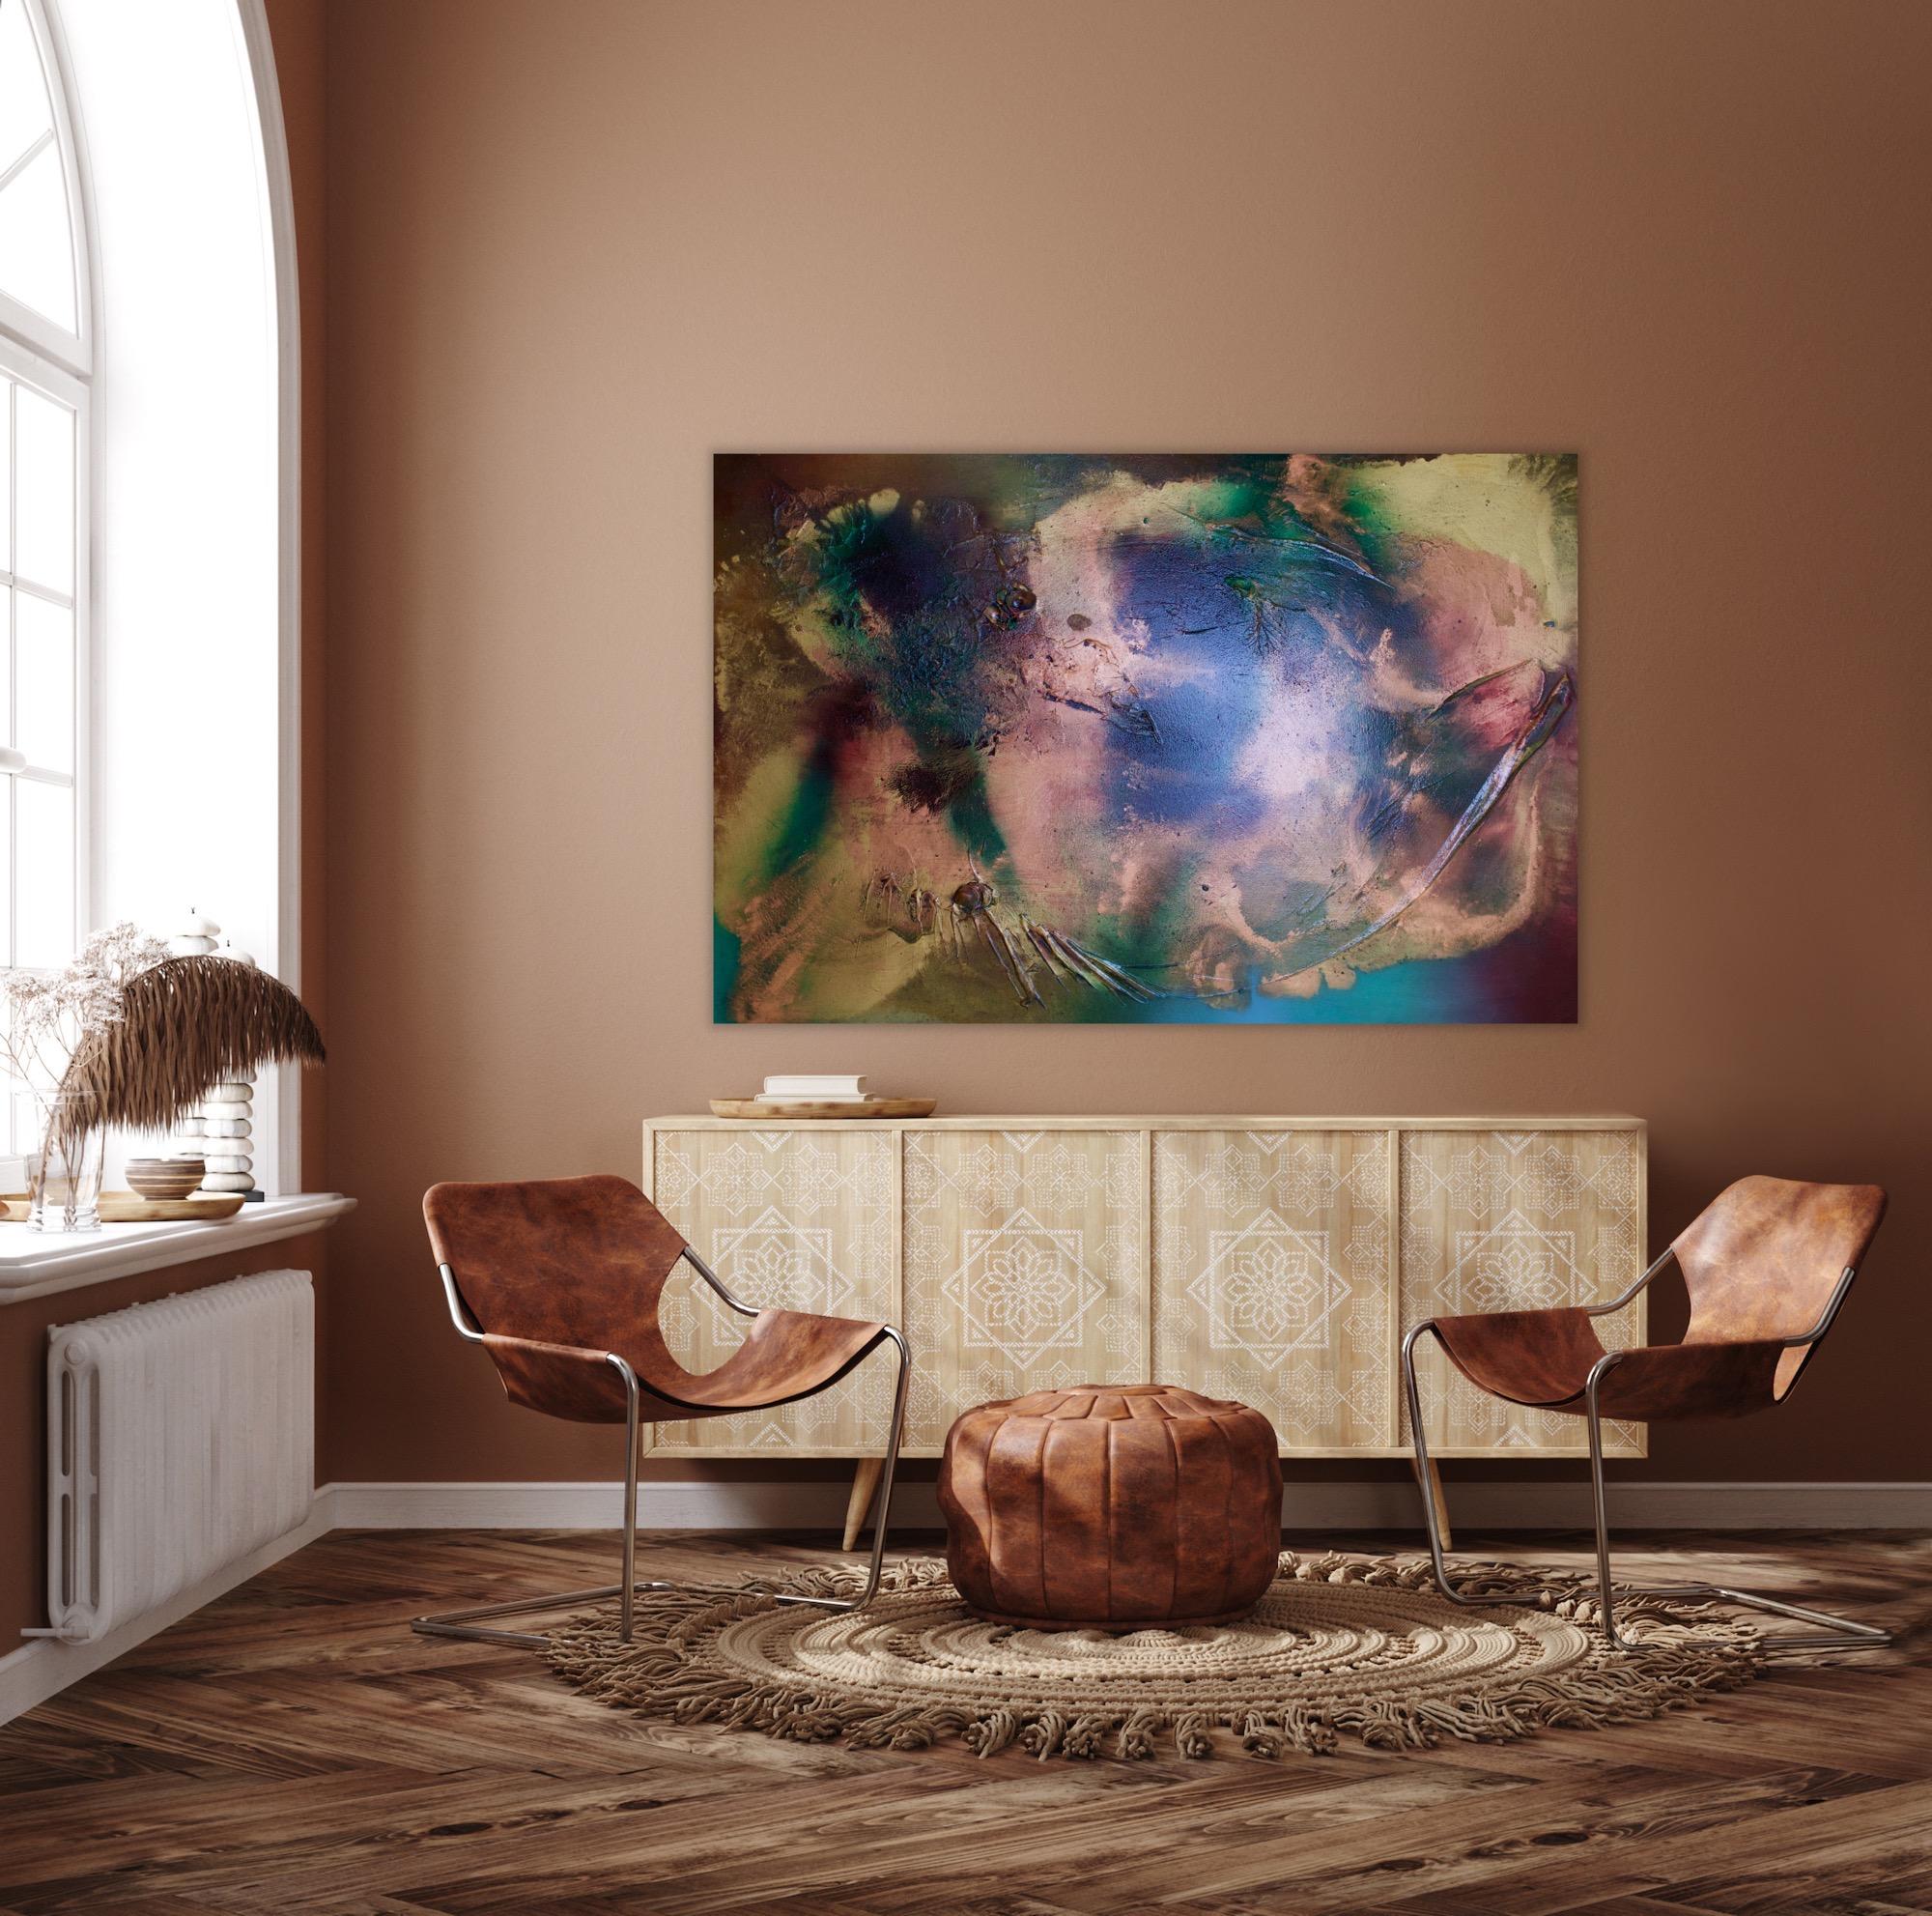 Rift Valley, sonde 2 (texture copper bronze gold emerald green abstract wine red - Painting by Melisa Taylor Metzger